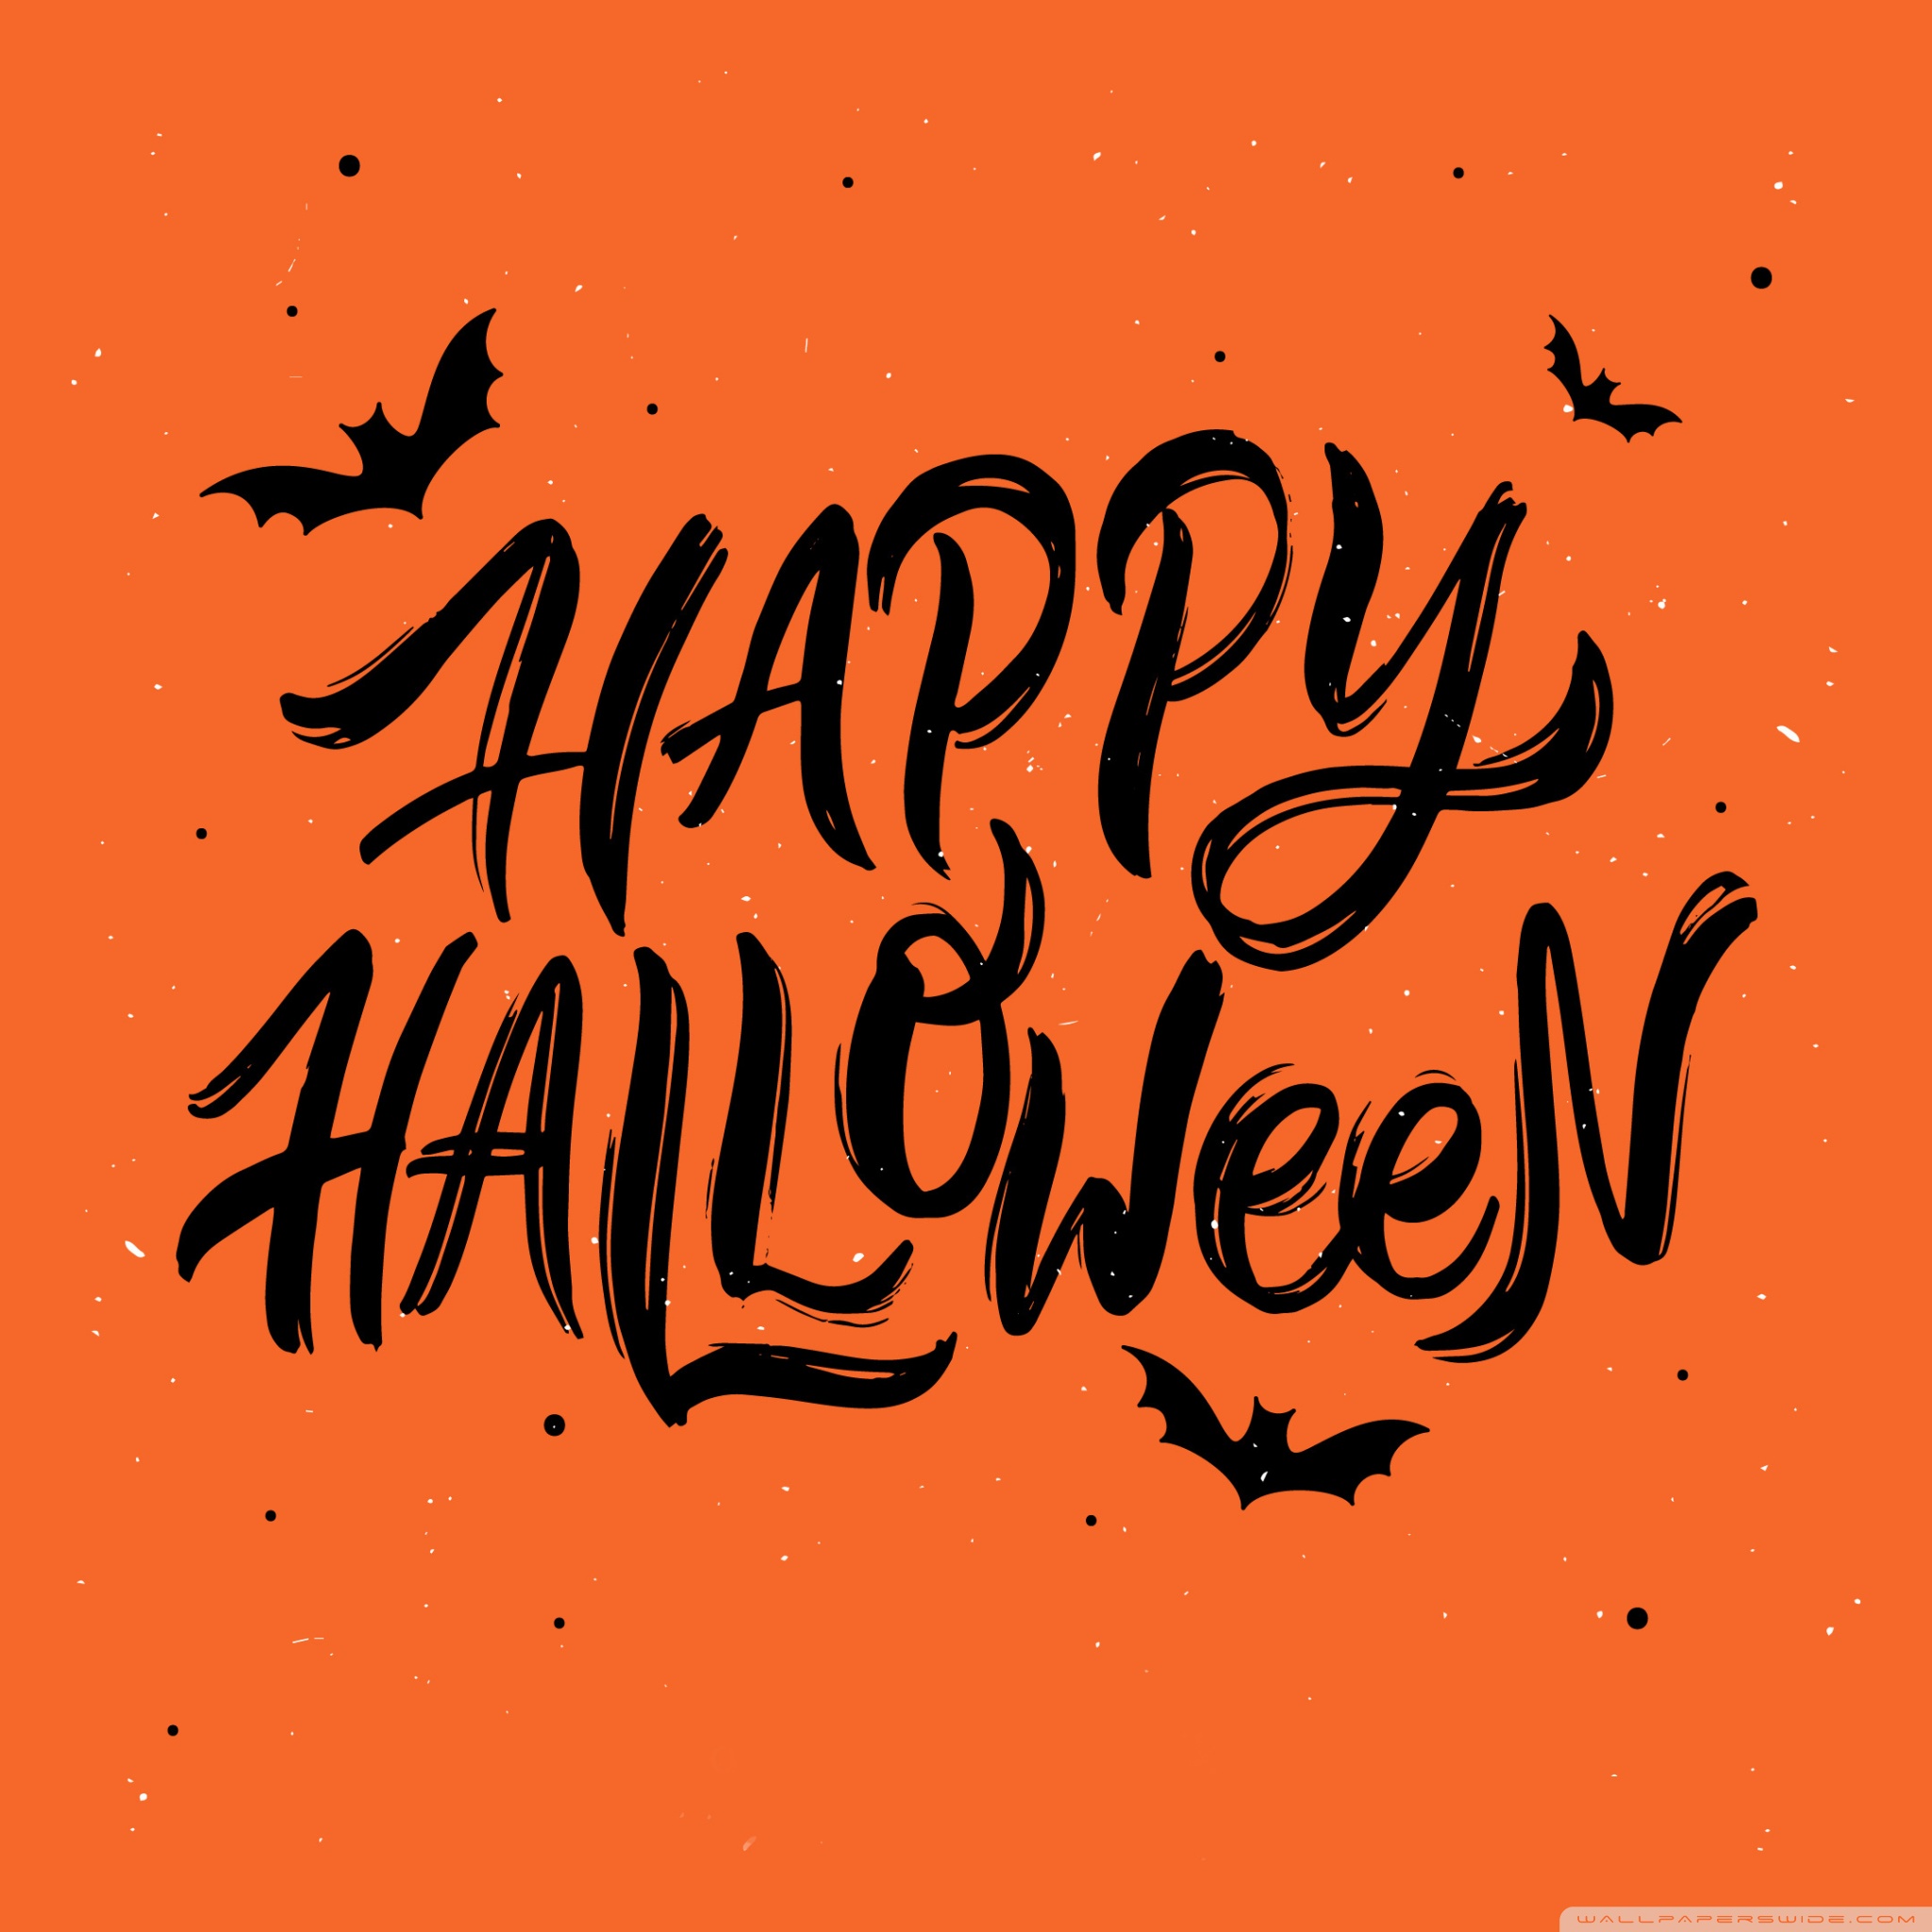 Halloween For Tablets Wallpapers